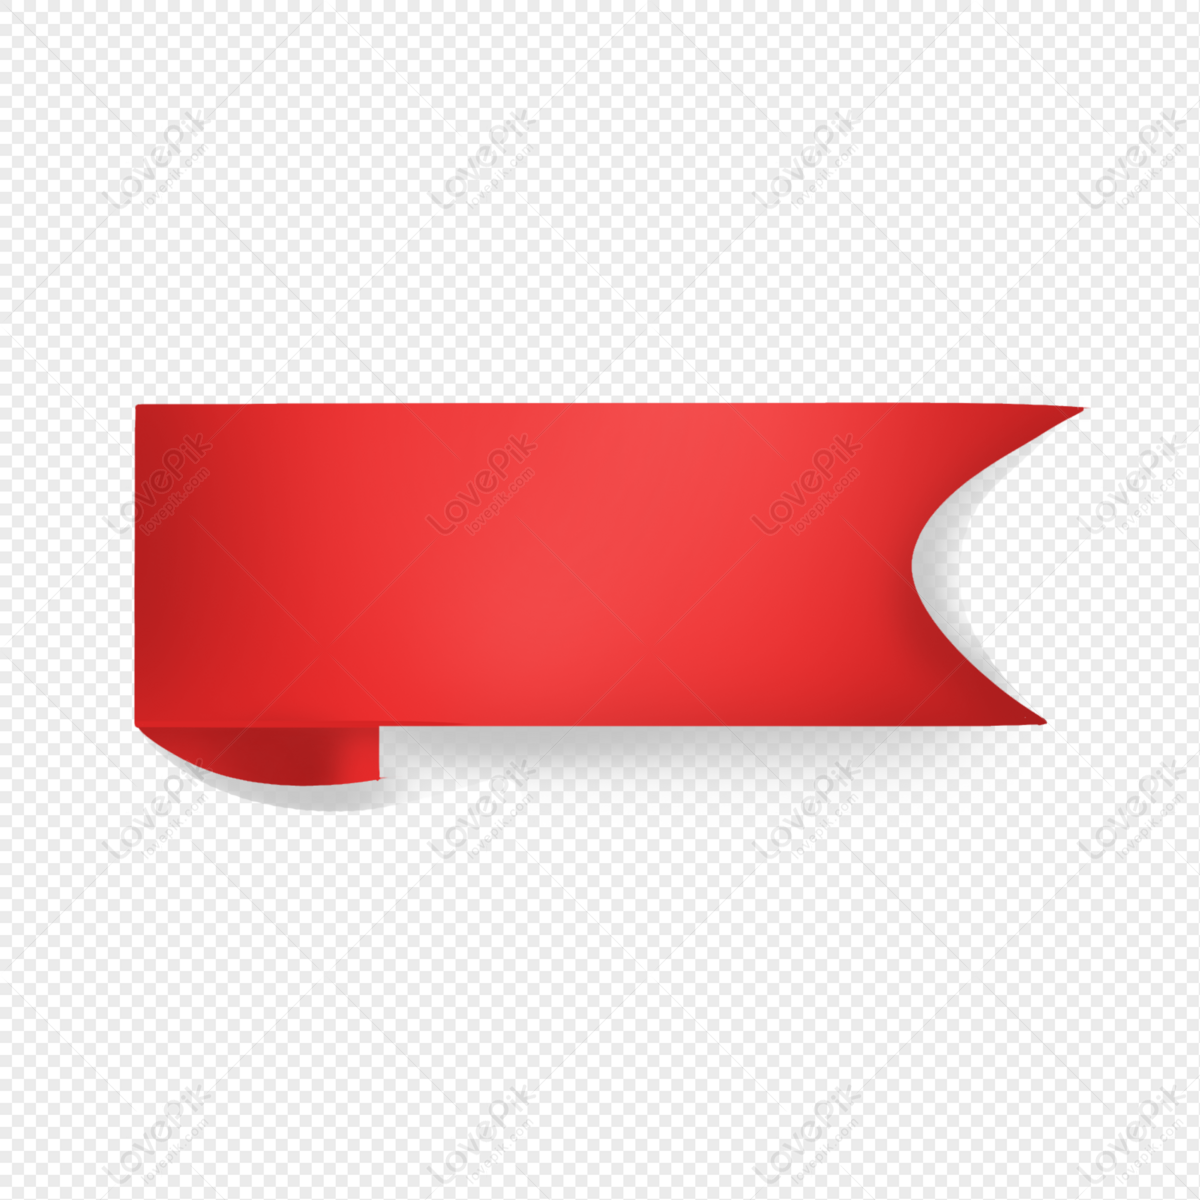 Red Ribbon PNG Transparent Images Free Download, Vector Files